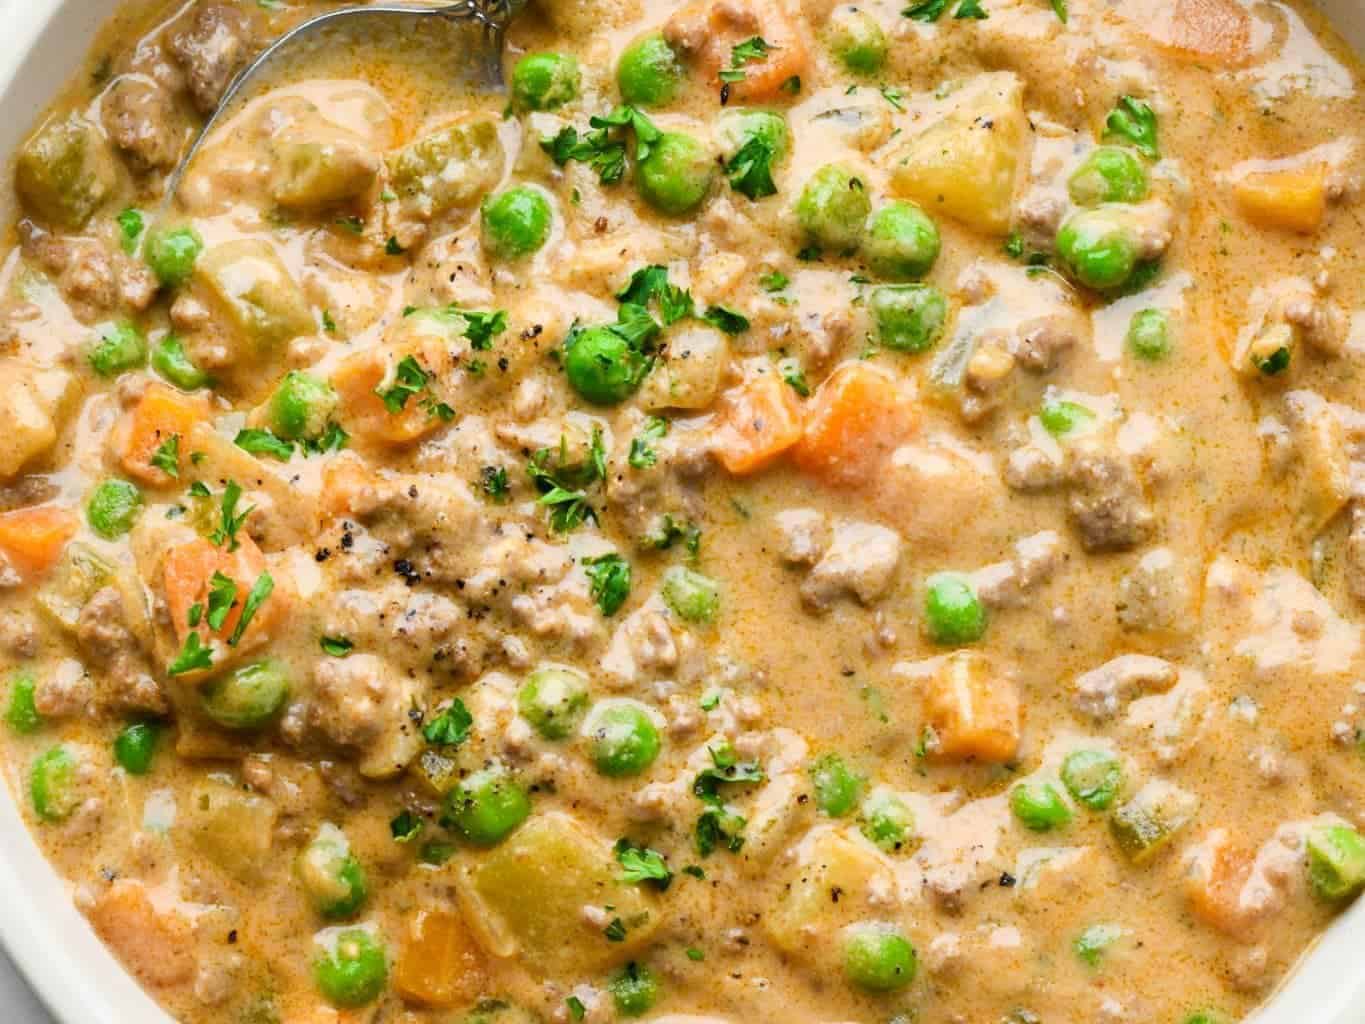 Shepherds pie soup with peas and carrots.